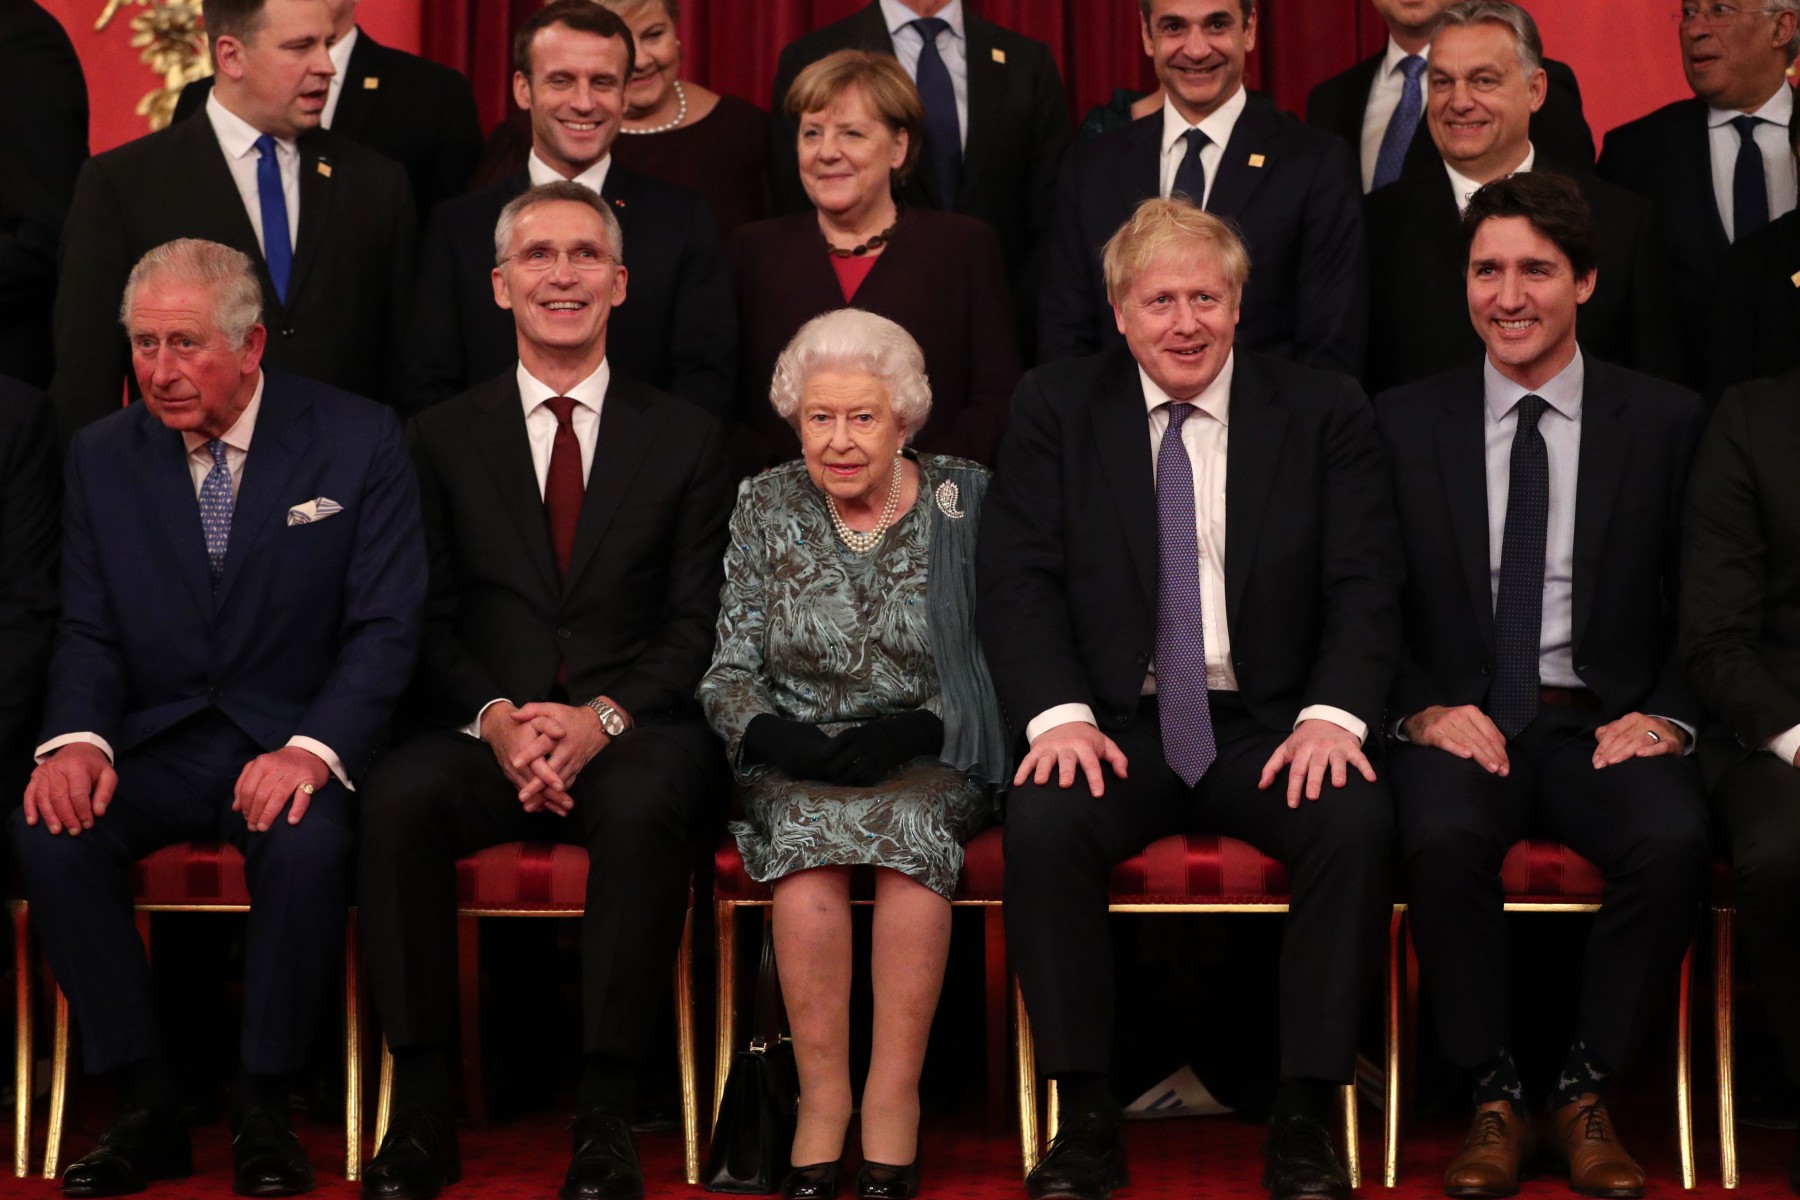 The Queen welcomed NATO leaders to the palace last night